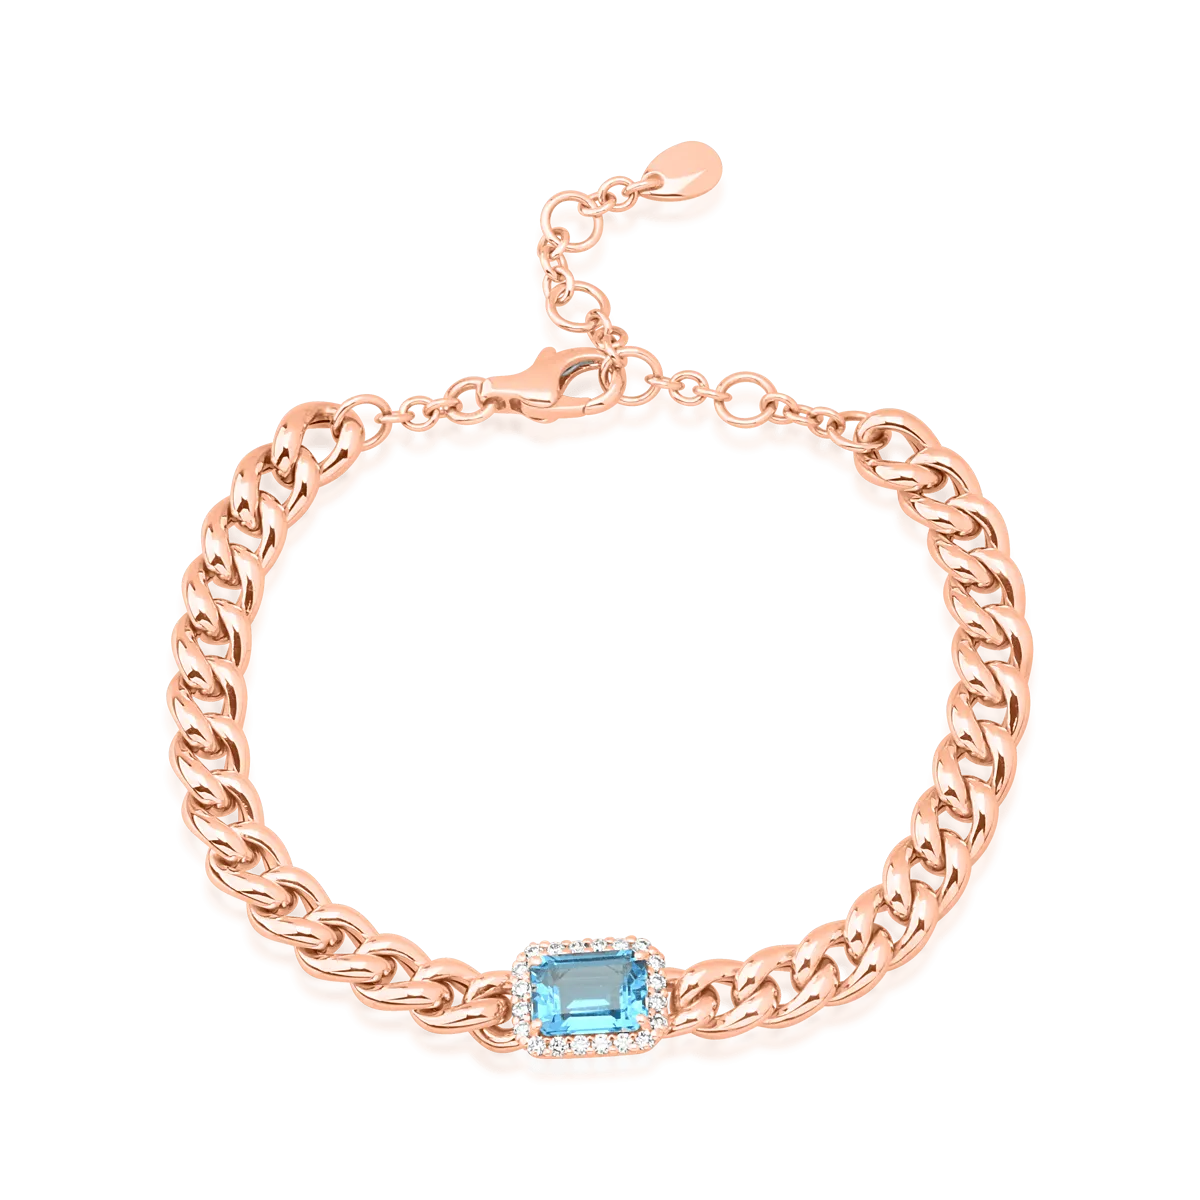 18K rose gold bracelet with 1.92ct blue topaz and 0.21ct diamonds